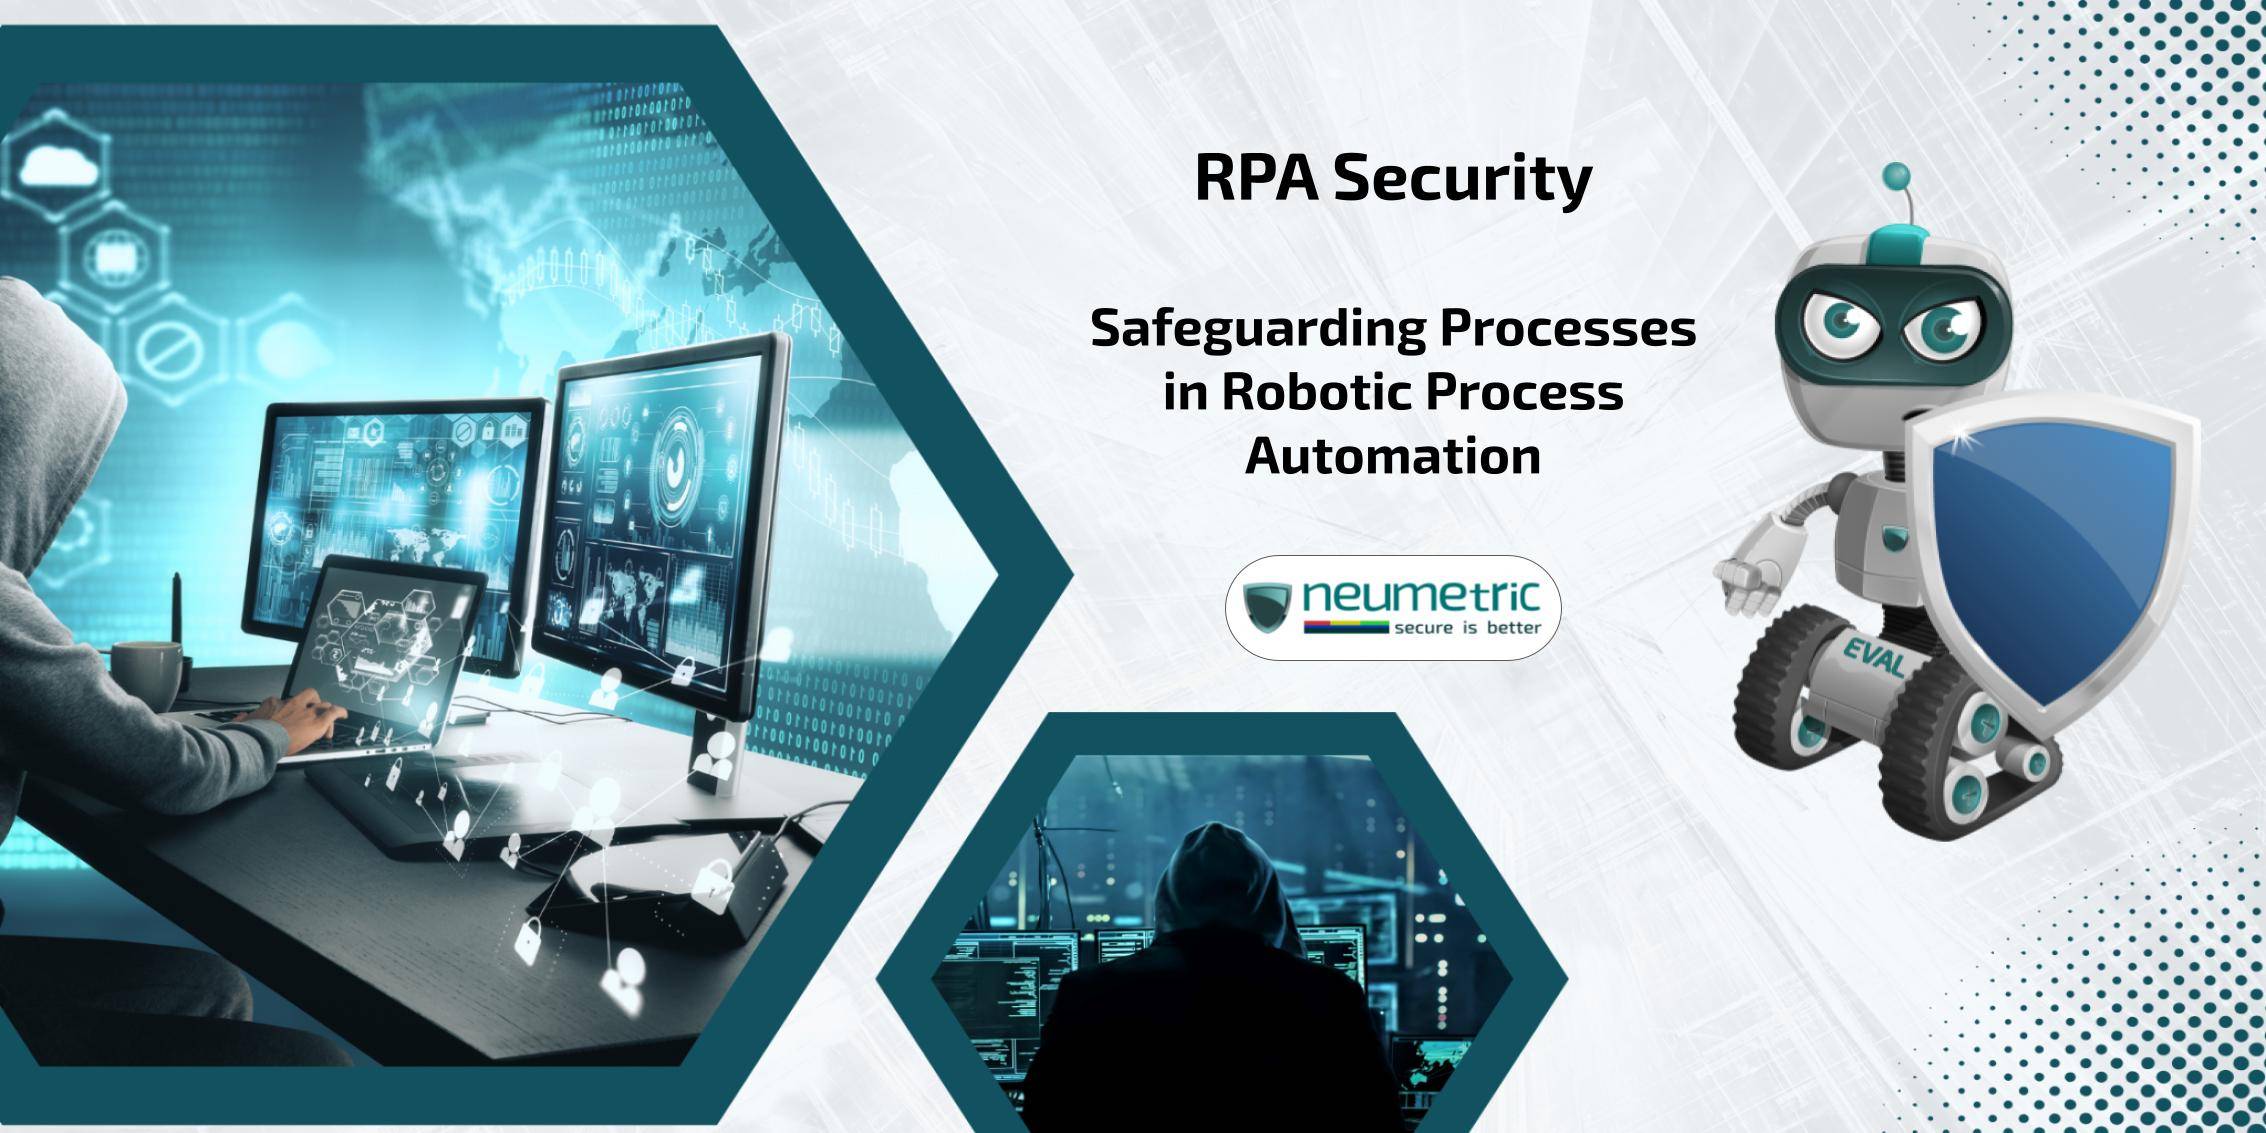 RPA Security: Safeguarding Processes in Robotic Process Automation